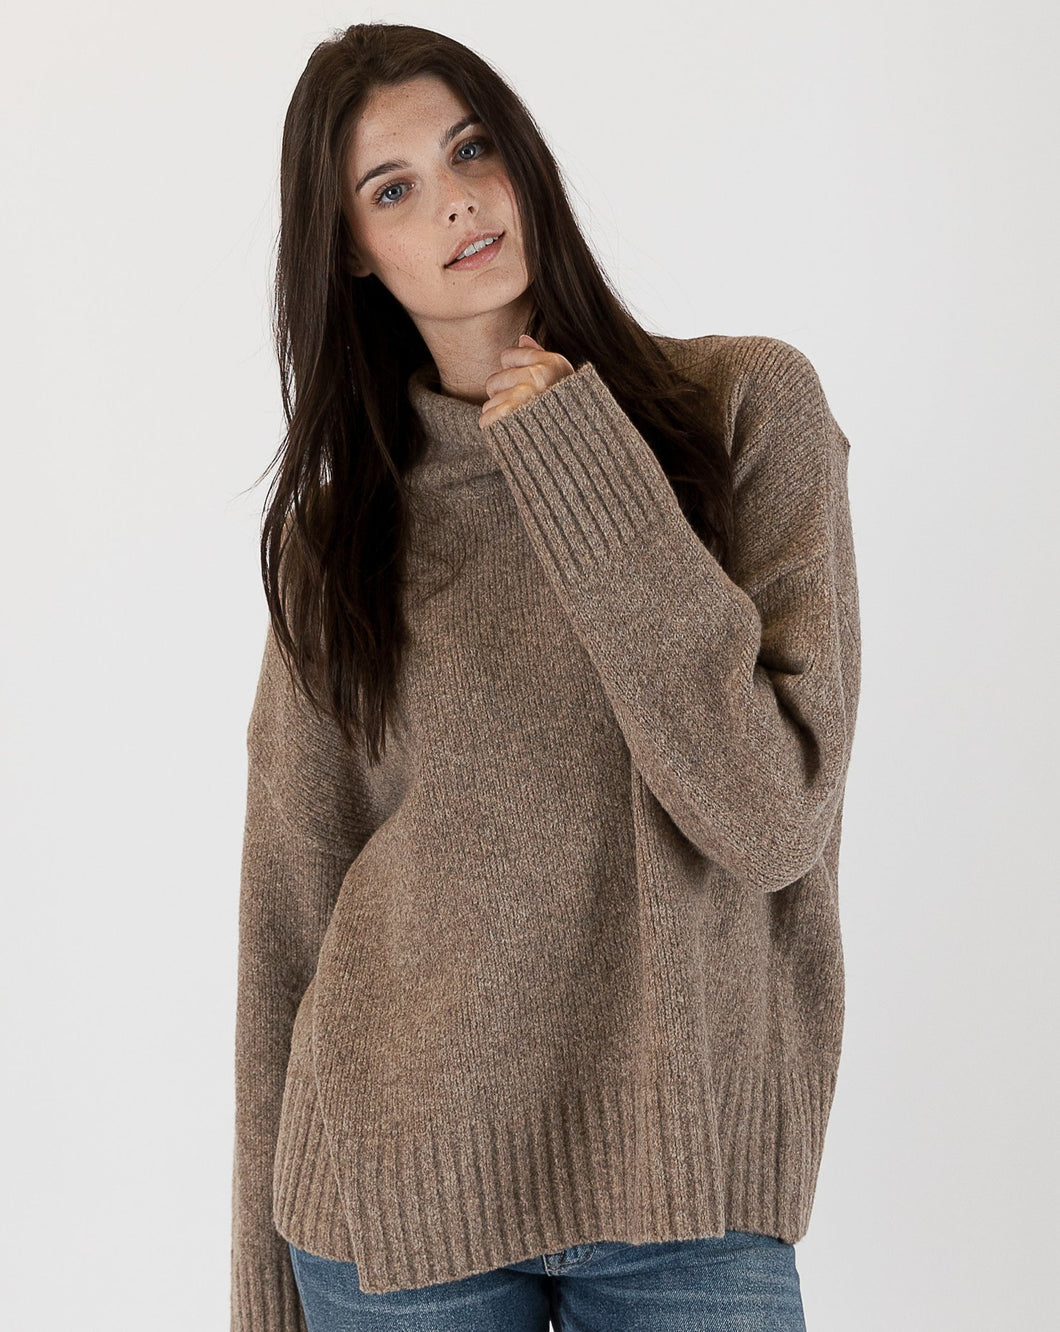 Lyla and Luxe Oliver Mockneck Sweater